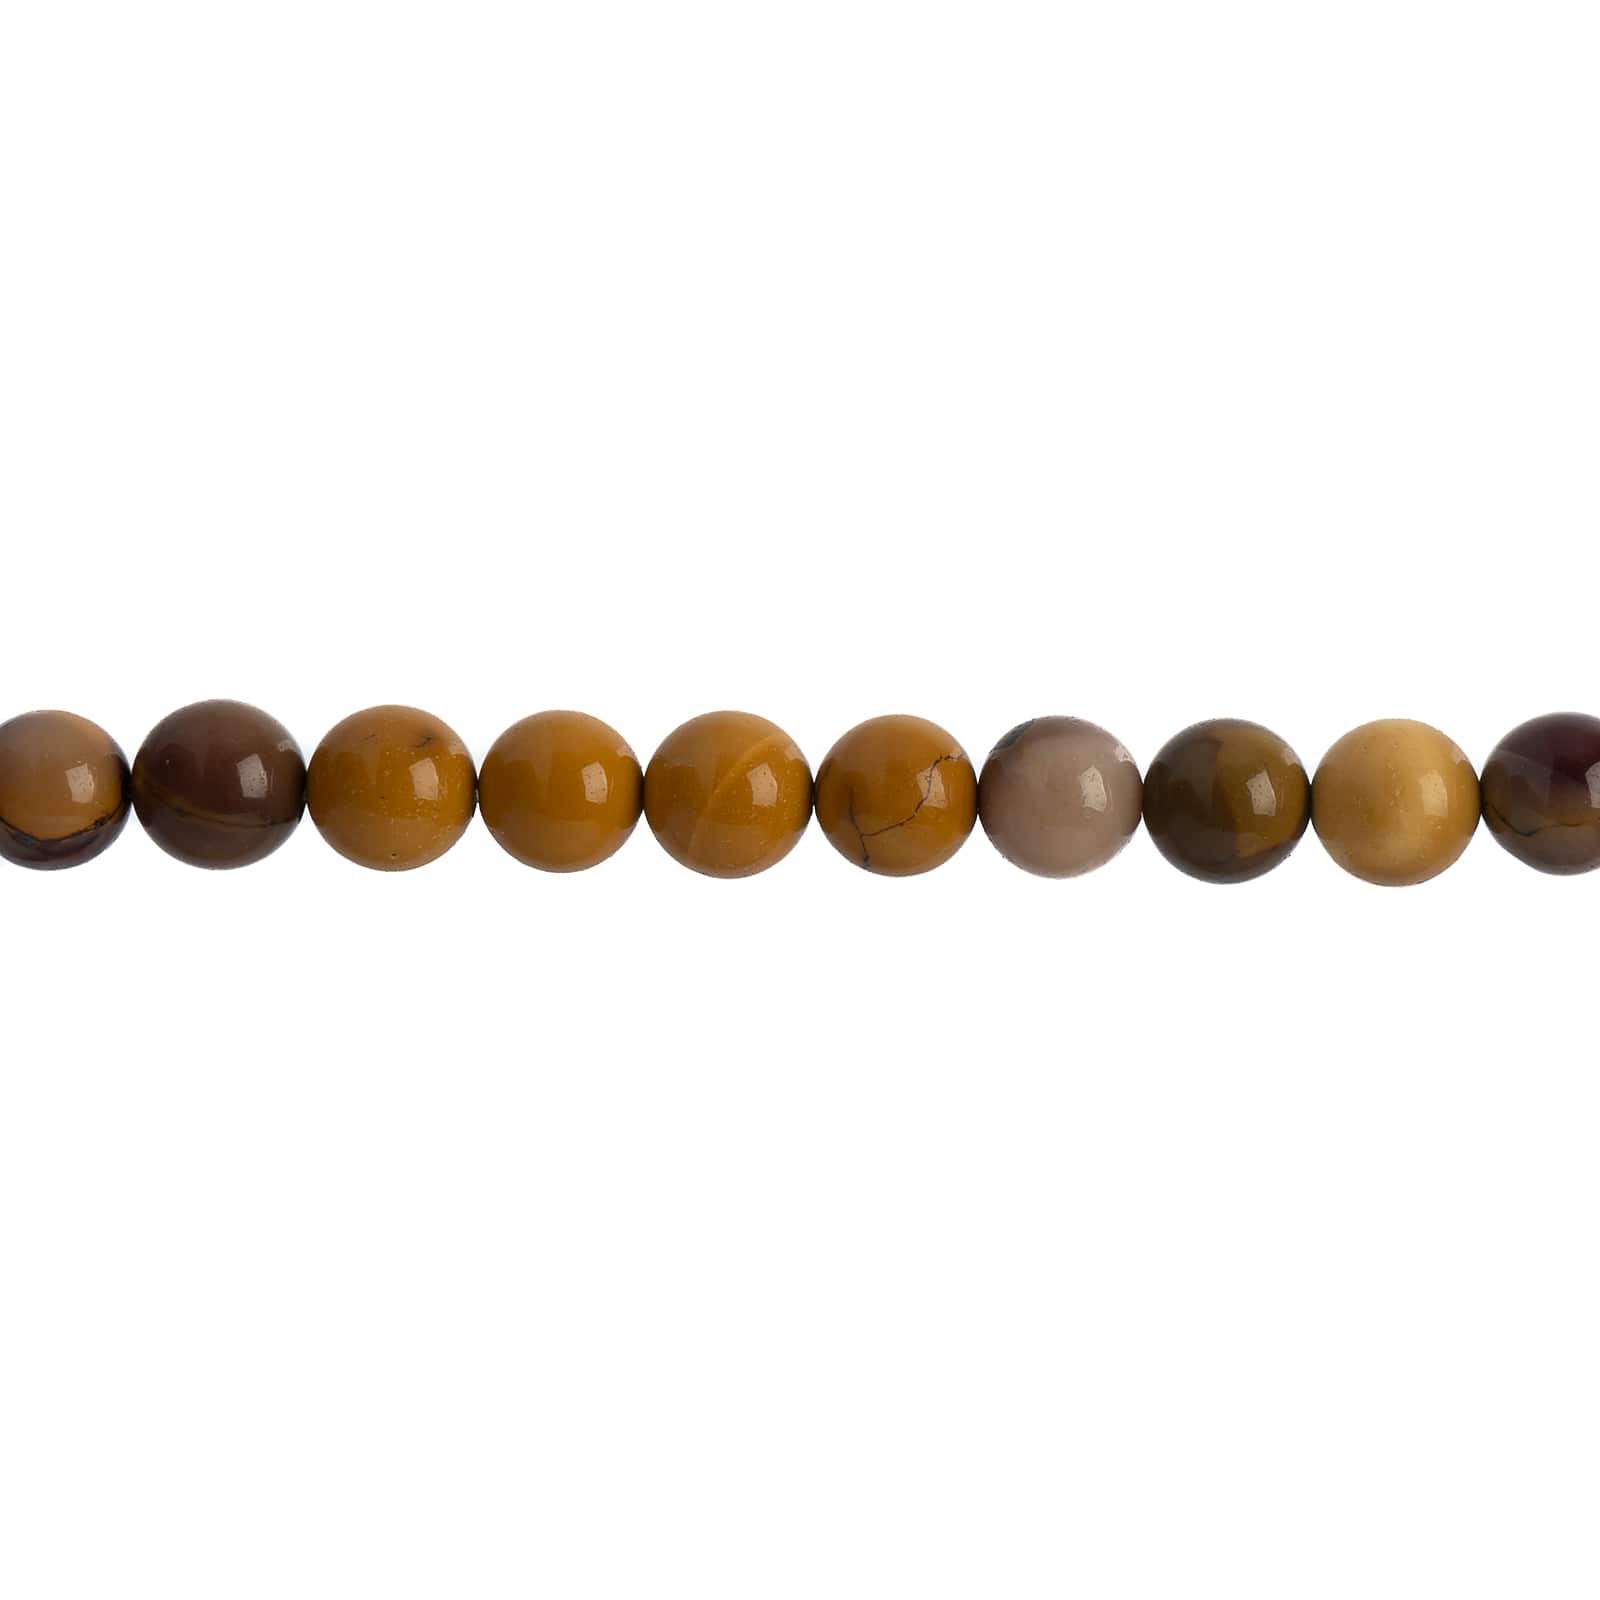 John Bead Earth's Jewels Natural Stone Round Beads, 8mm